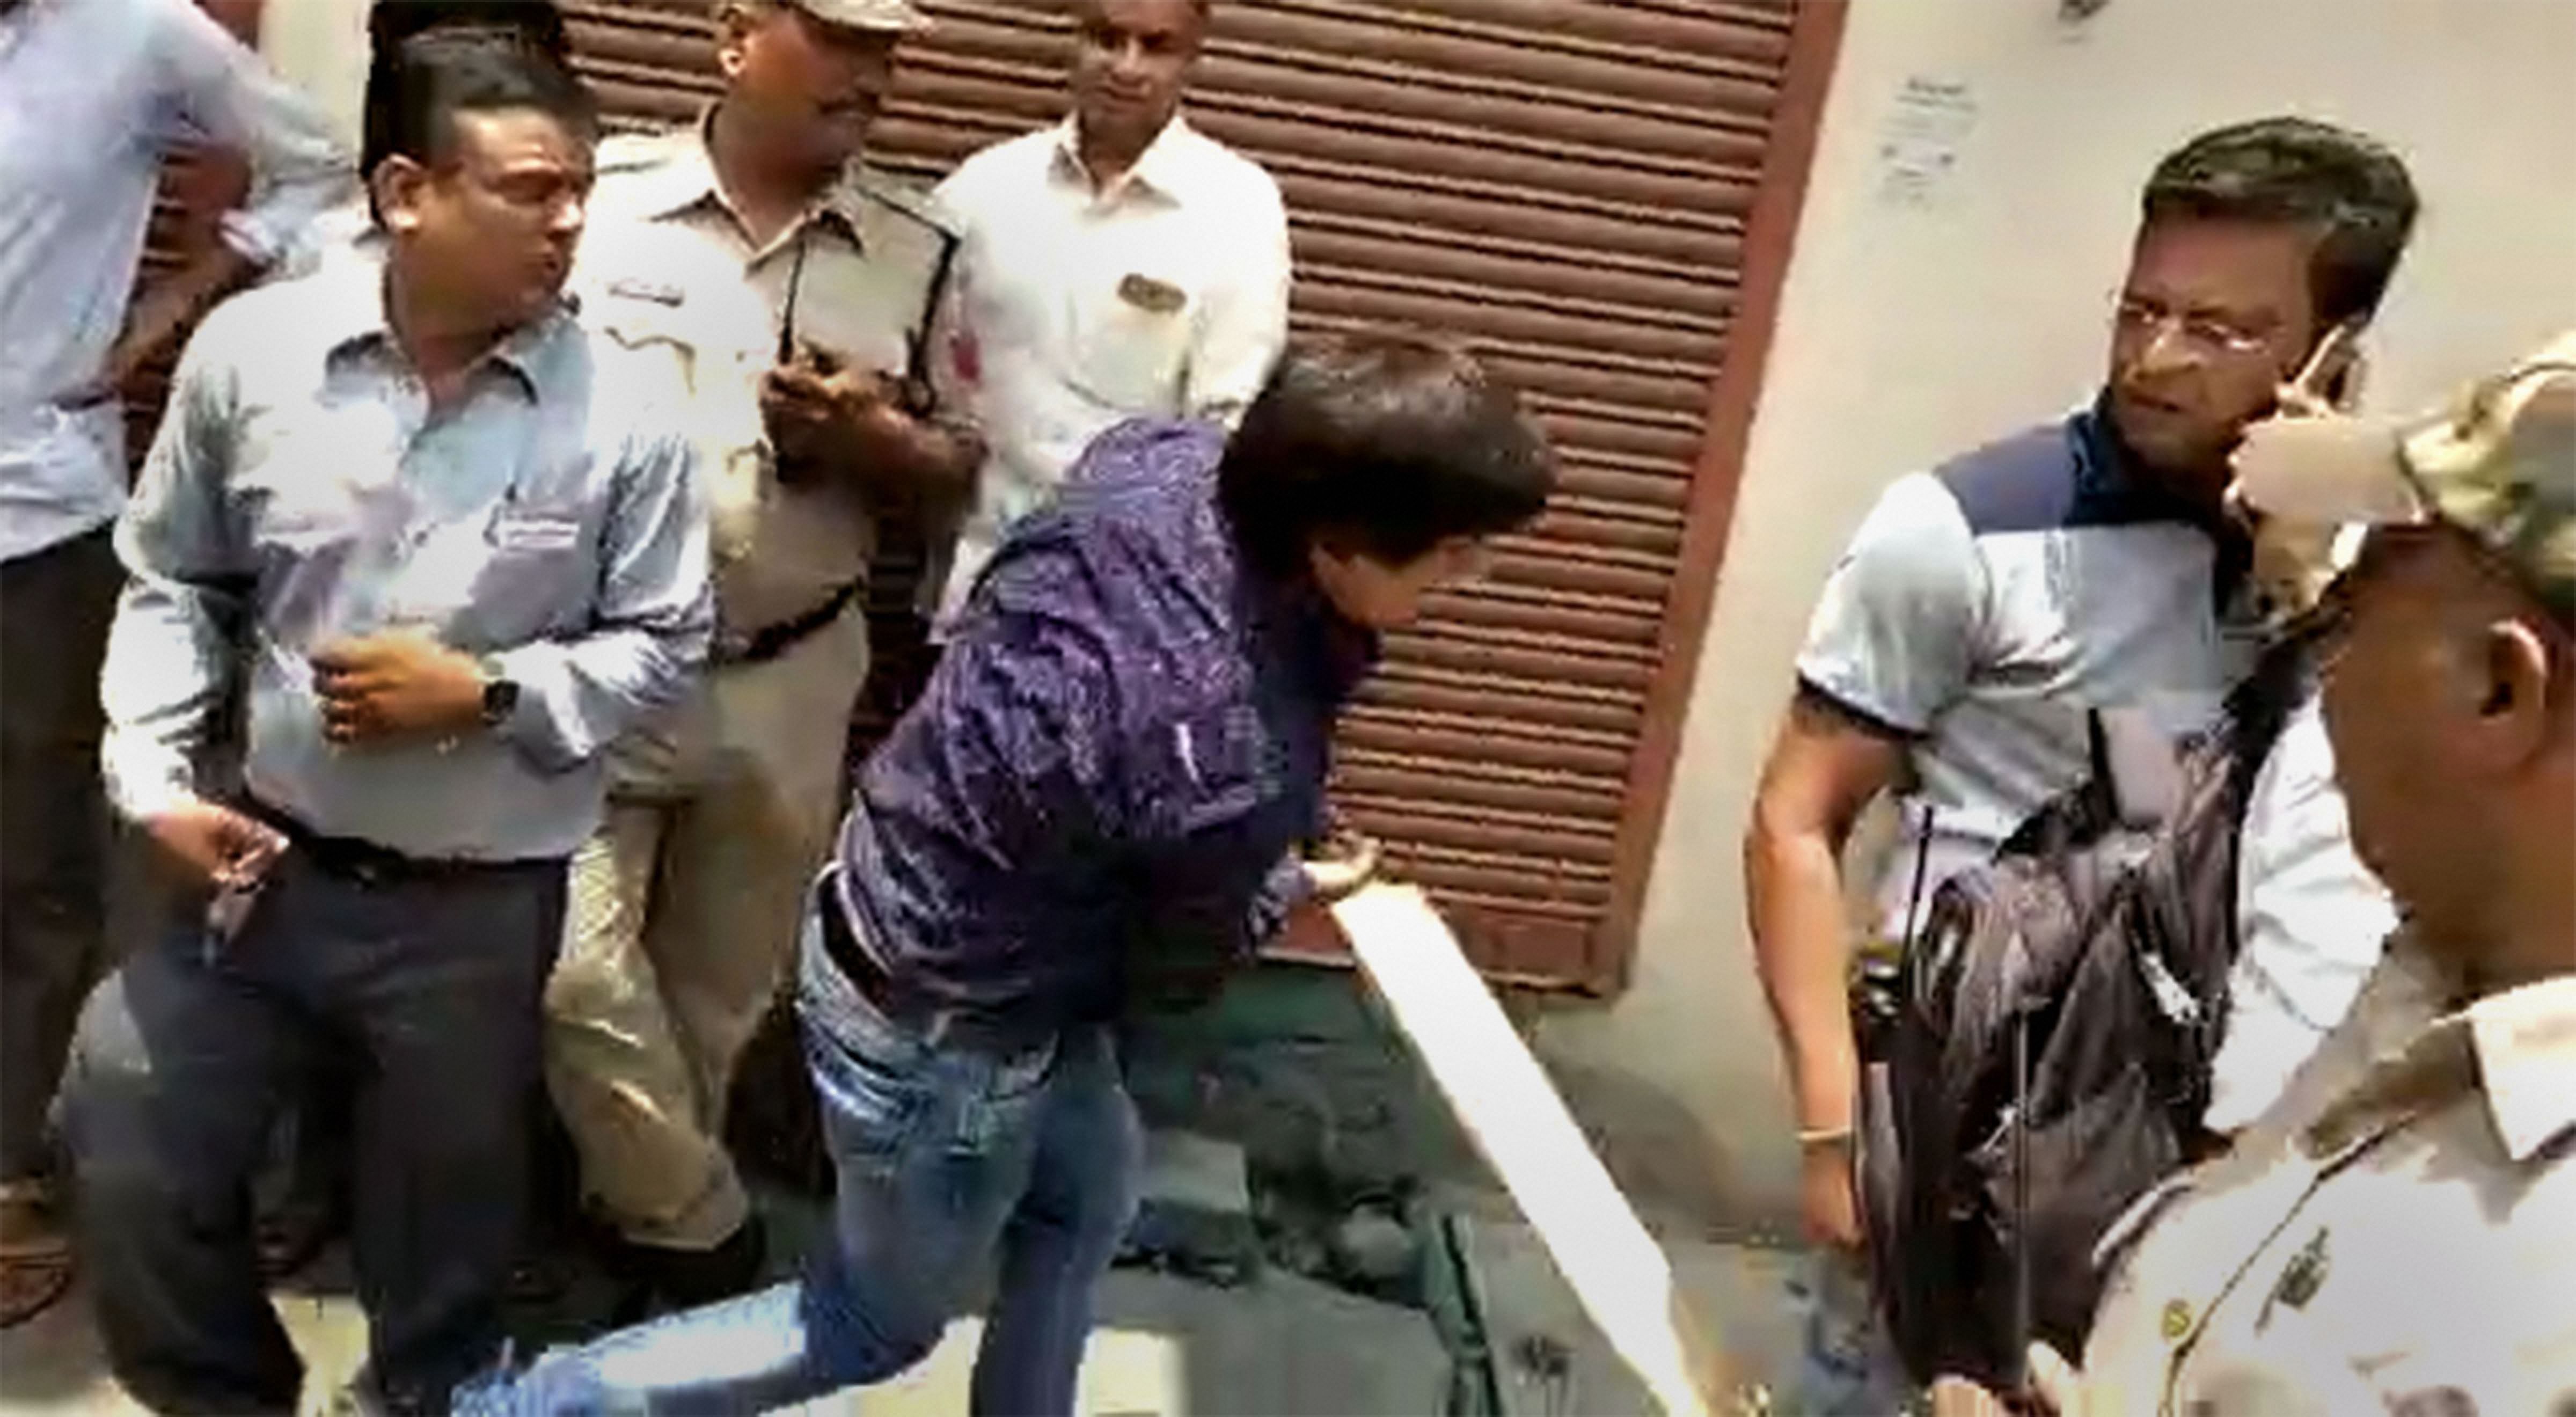 In this video still BJP MLA Akash Vijayvargiya is seen assaulting a civic official with a cricket bat in Indore on June 26, 2019. Vijayvargiya allegedly beat up the official for attempting to demolish a building of his supporter. PTI photo